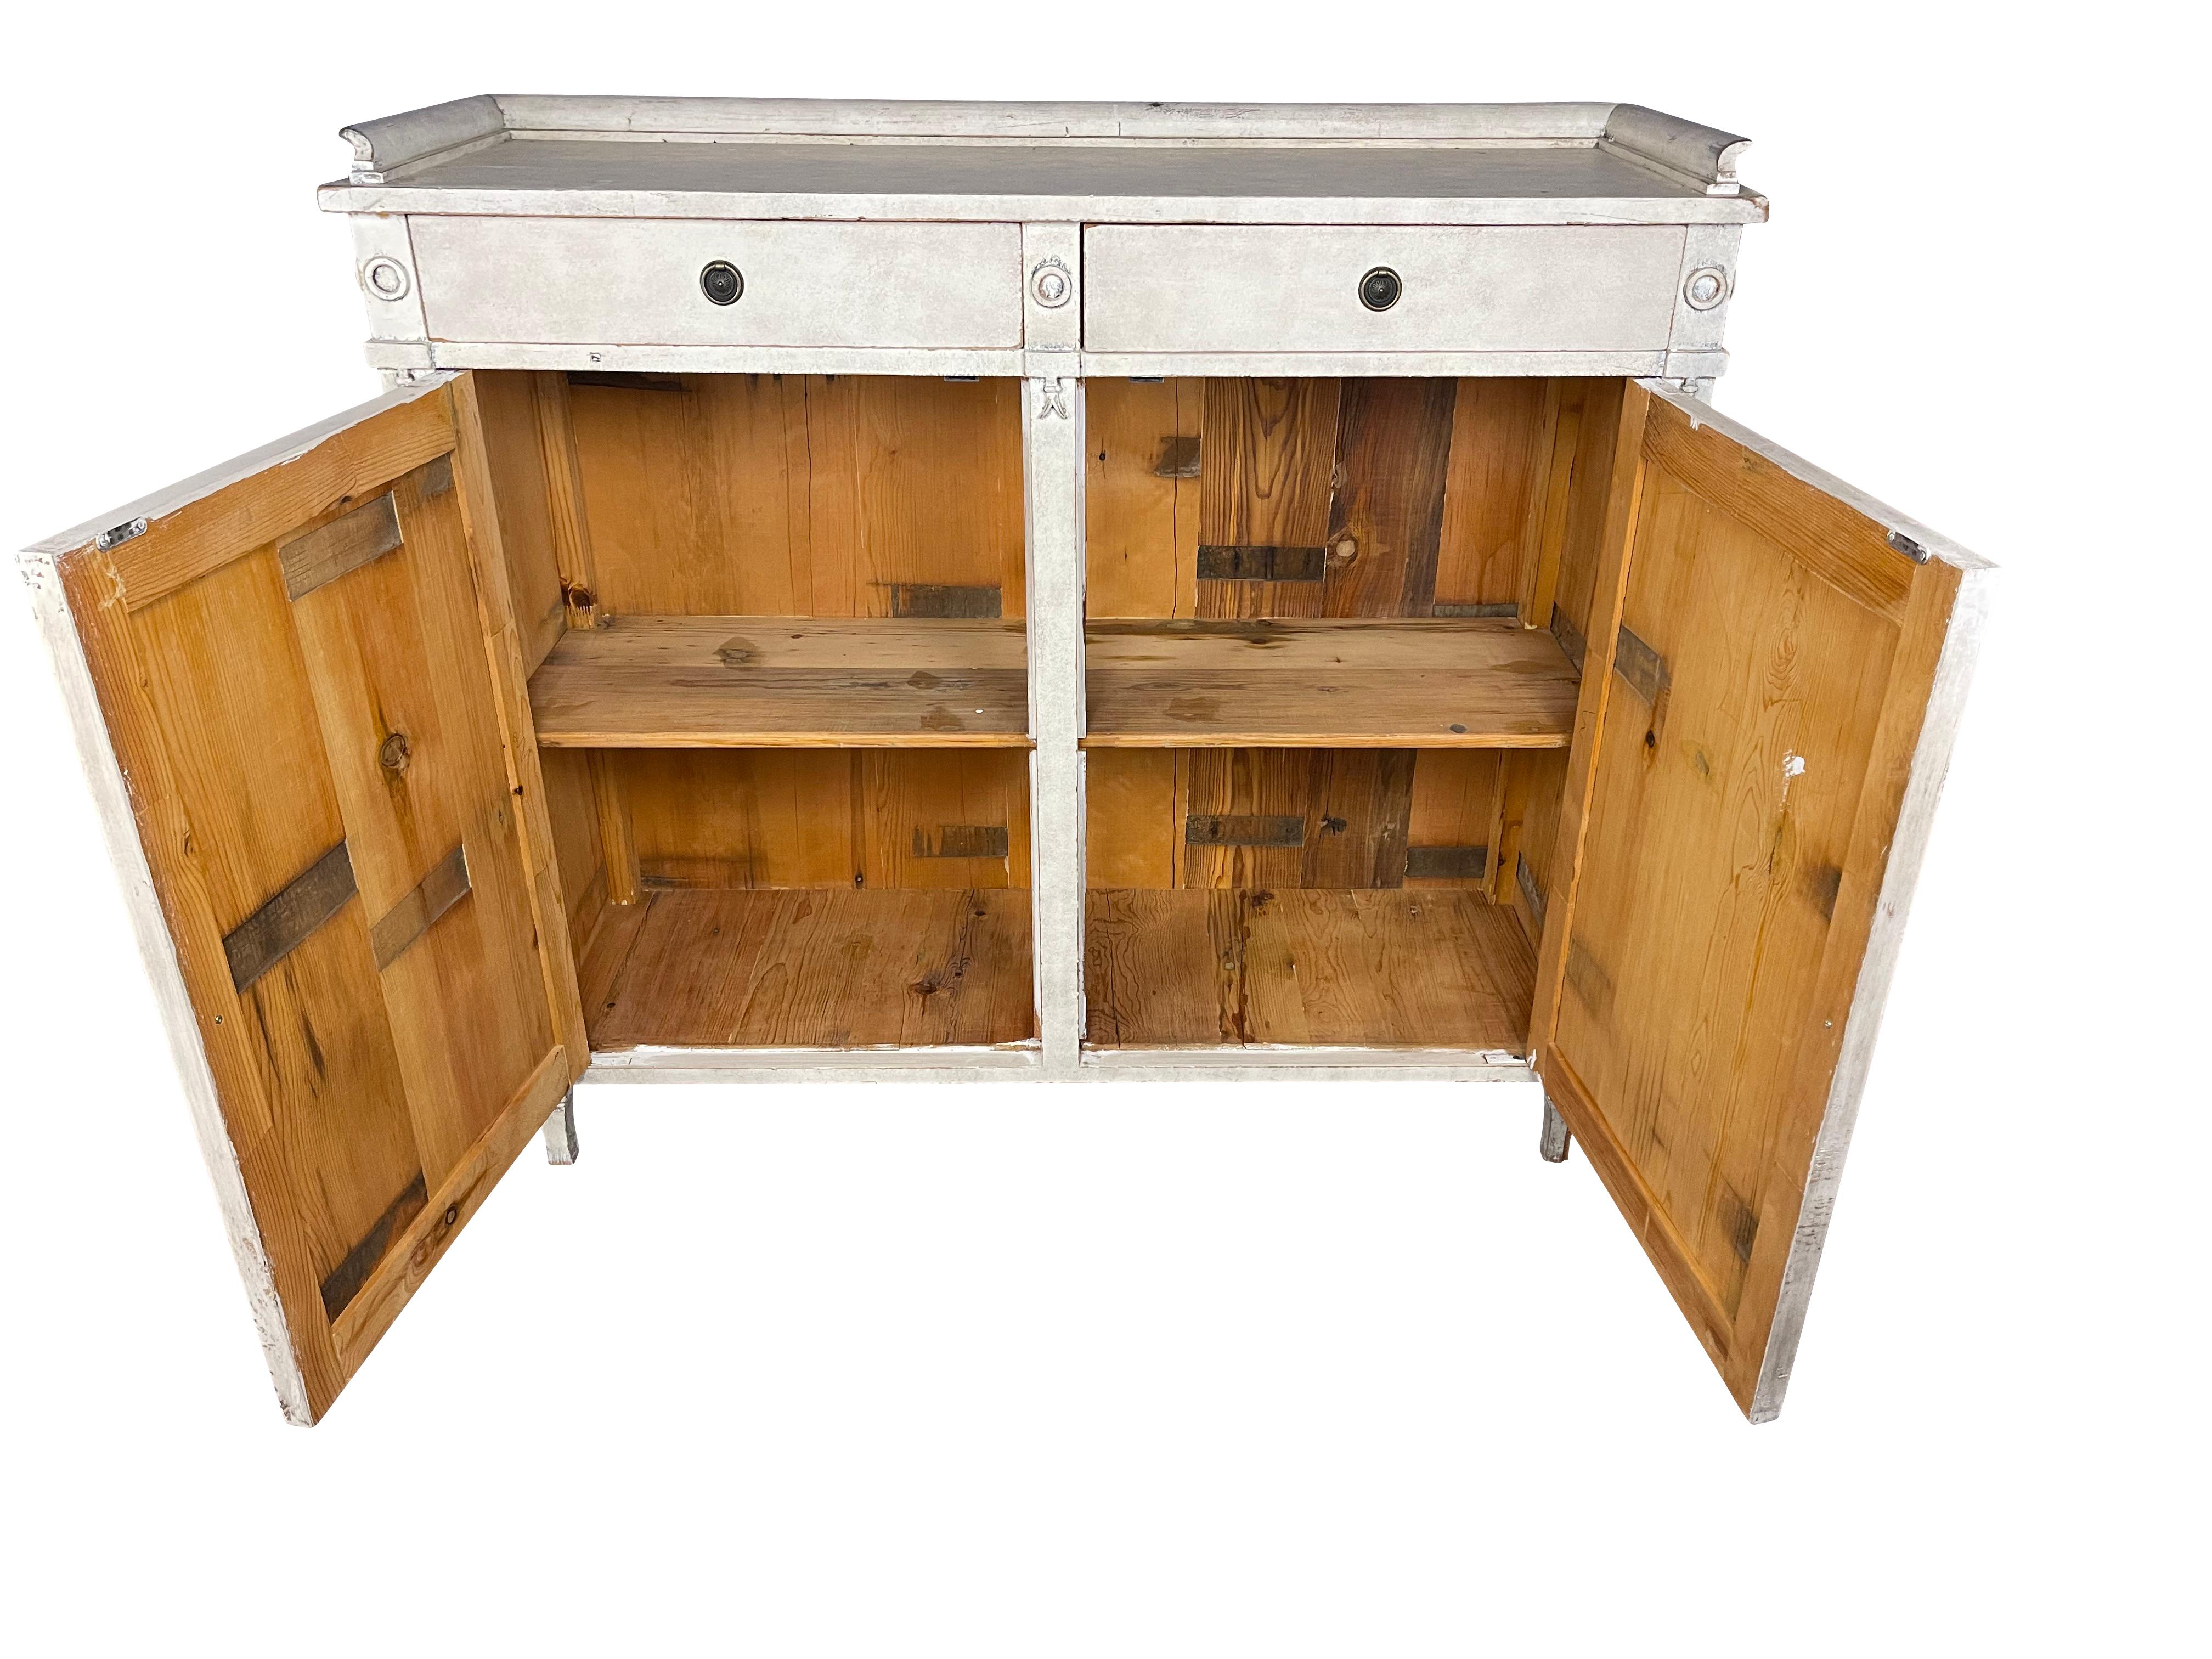 19th Century Swedish Gustavian Lime Washed Buffet / Server In Good Condition For Sale In Essex, MA